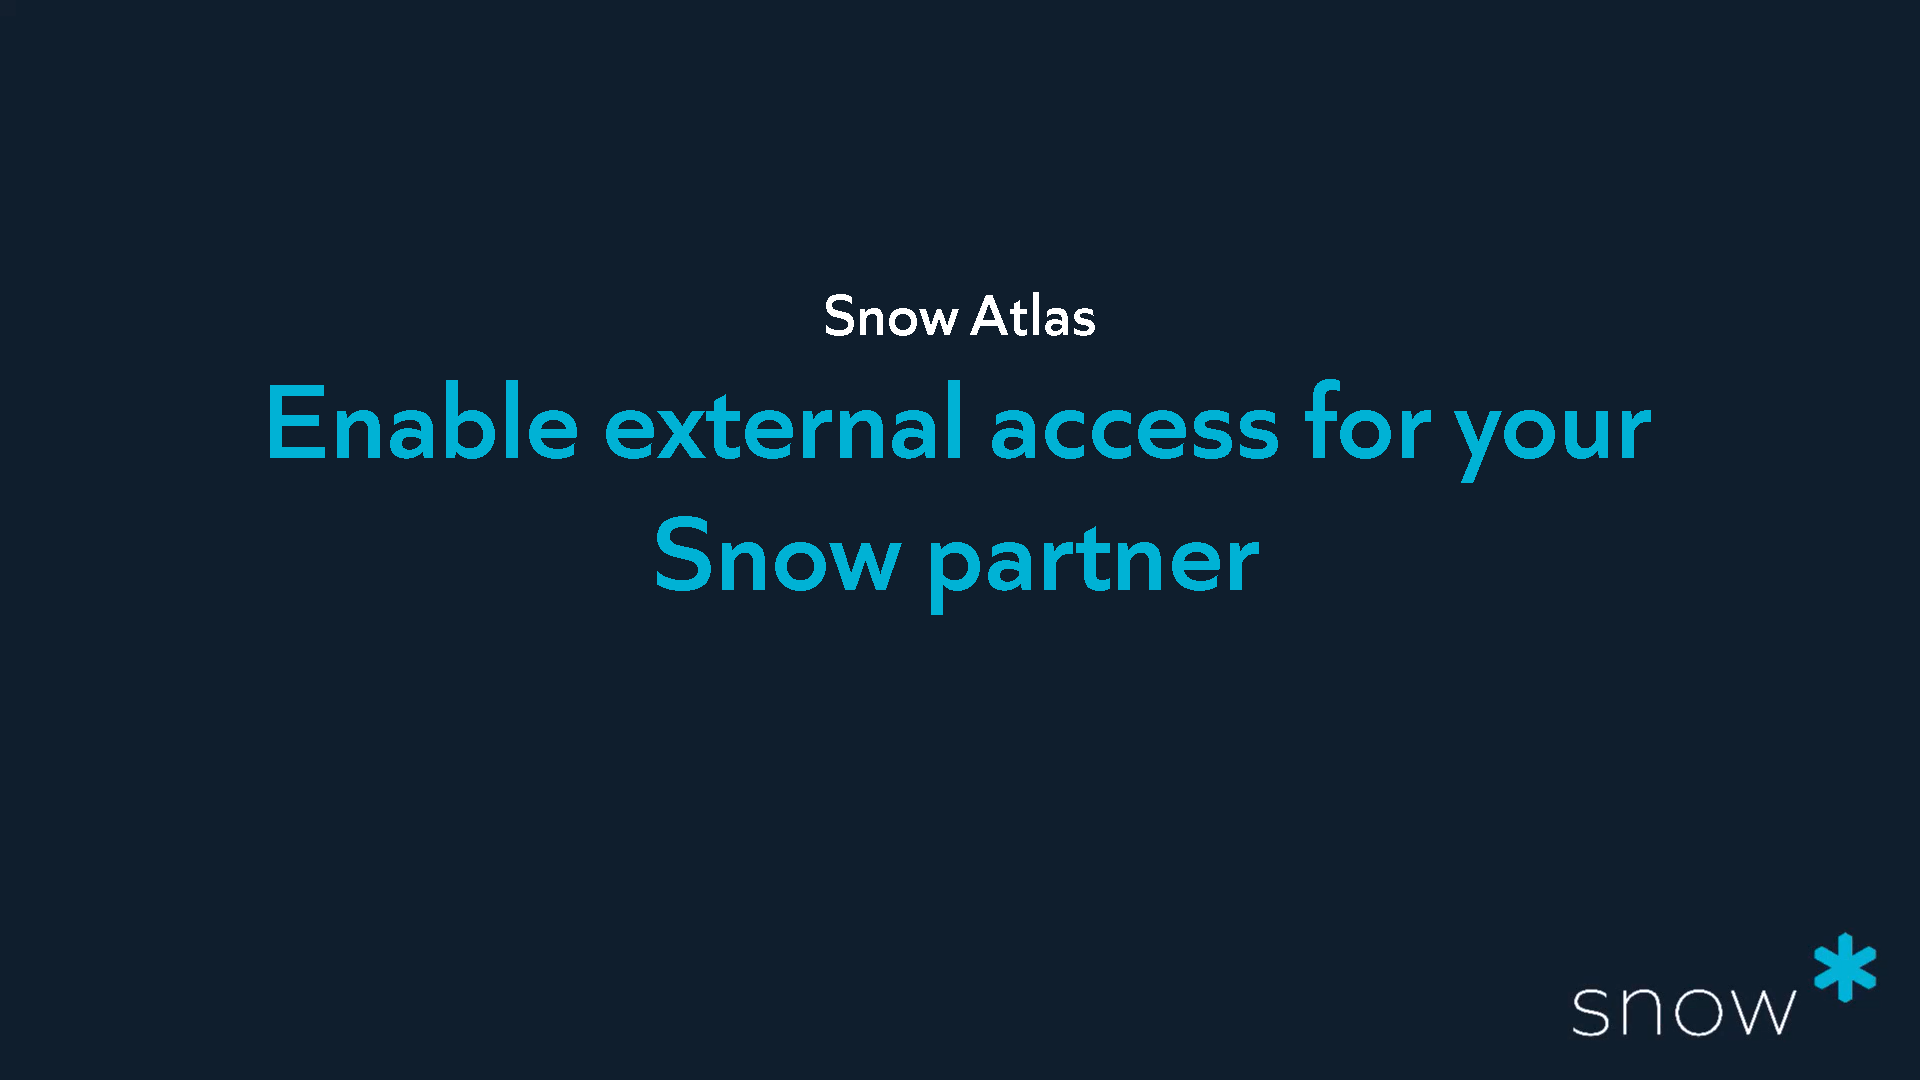 Enable external access for your Snow partner